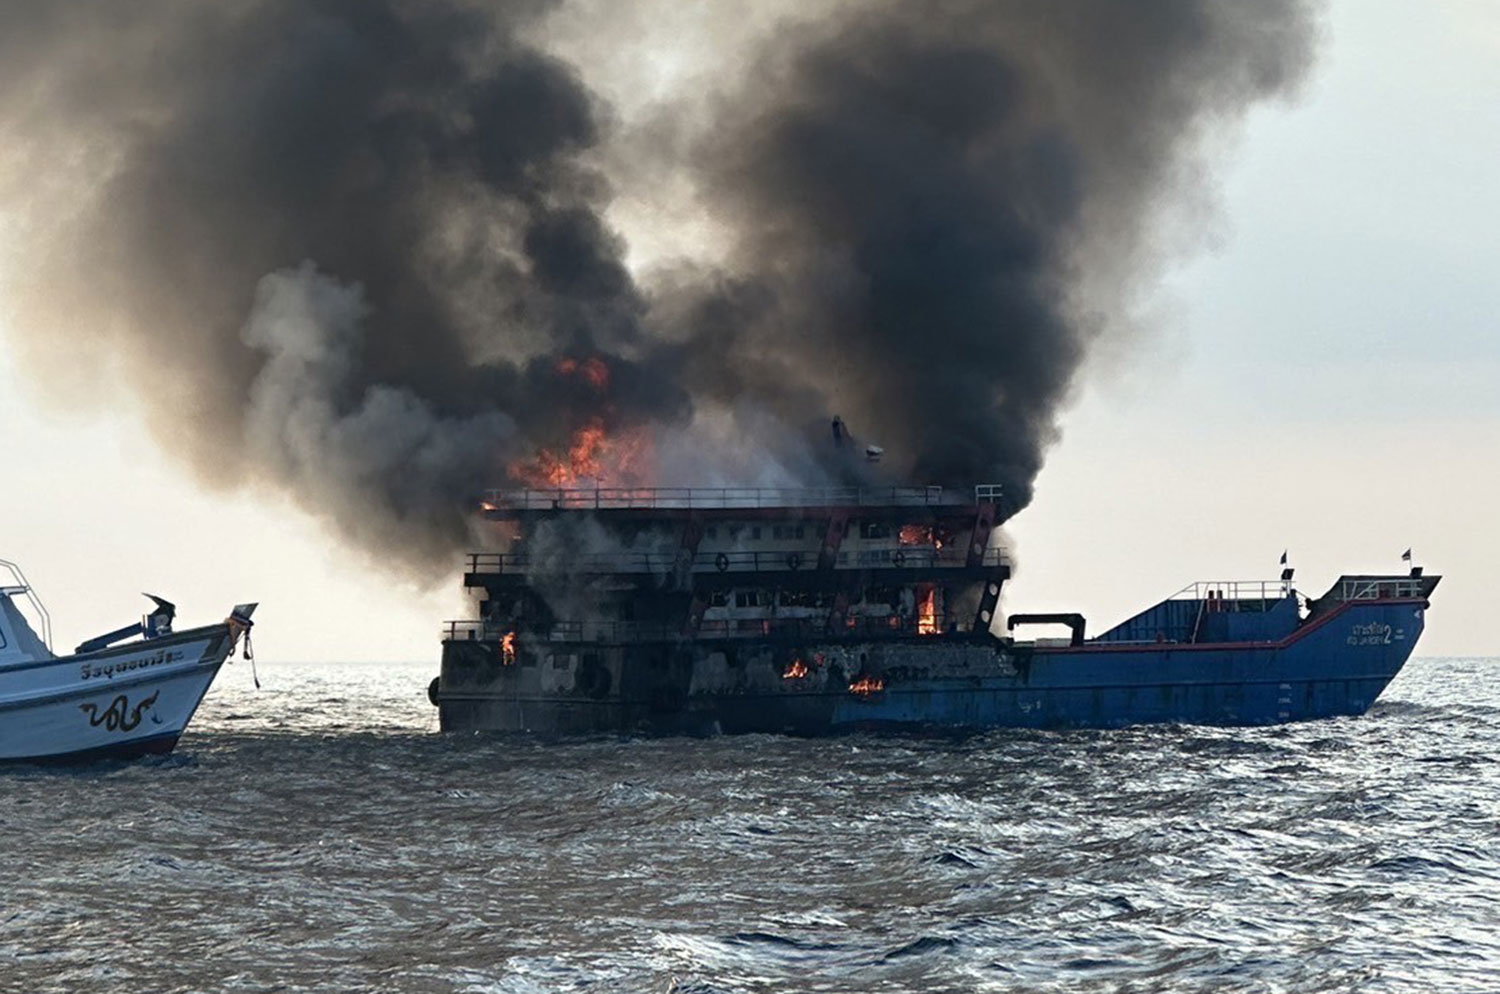 Koh Tao Ferry Carrying 100 Passengers Catches Fire Off the Coast of Koh Tao